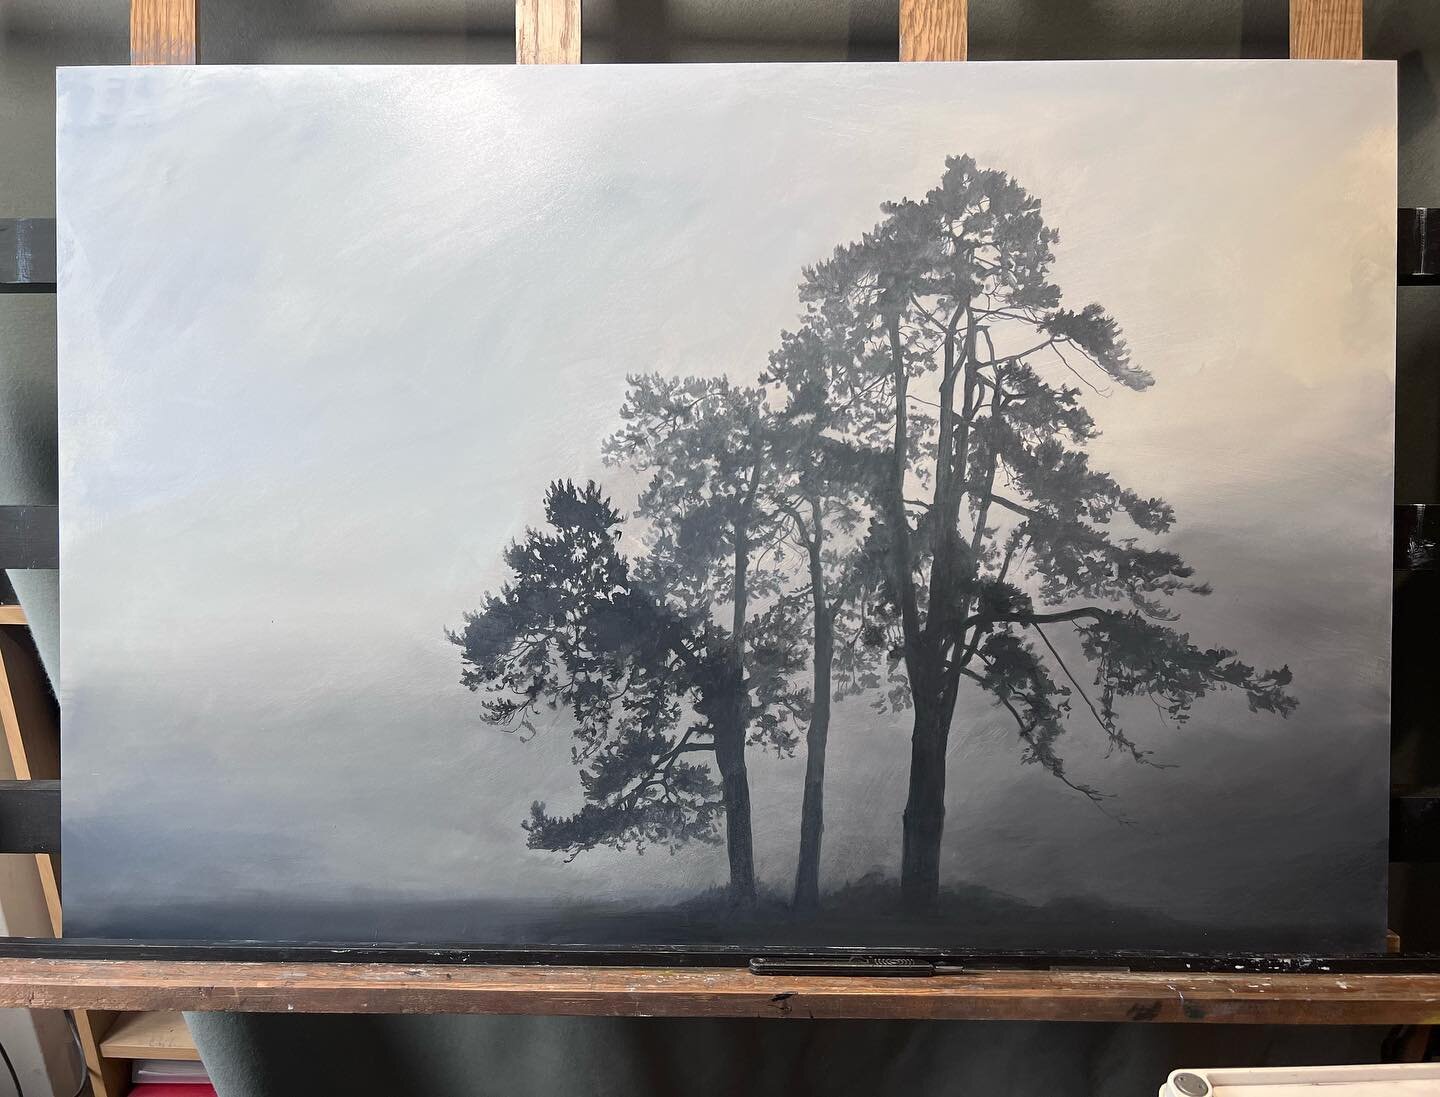 Is it too soon to start thinking about Autumn and cooler, misty days? A nice end to the week to get this finished though! As yet &ldquo;untitled&rdquo;, oil on panel 24&rdquo; x 36&rdquo; (61cm x91cm).
#misty #mistypainting #mistytrees #scottspine #o